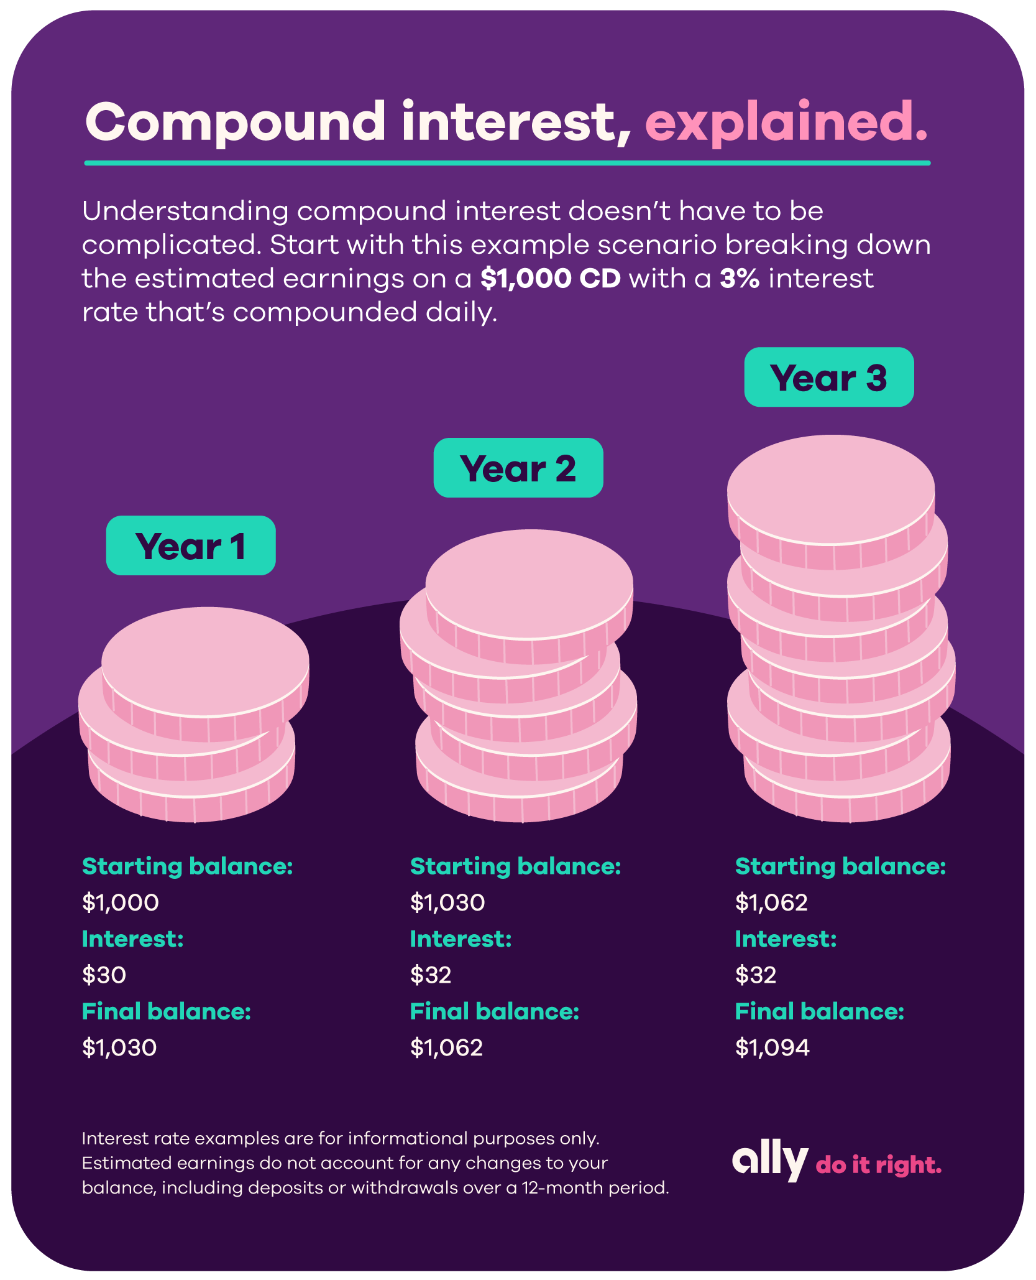 What is compound interest?